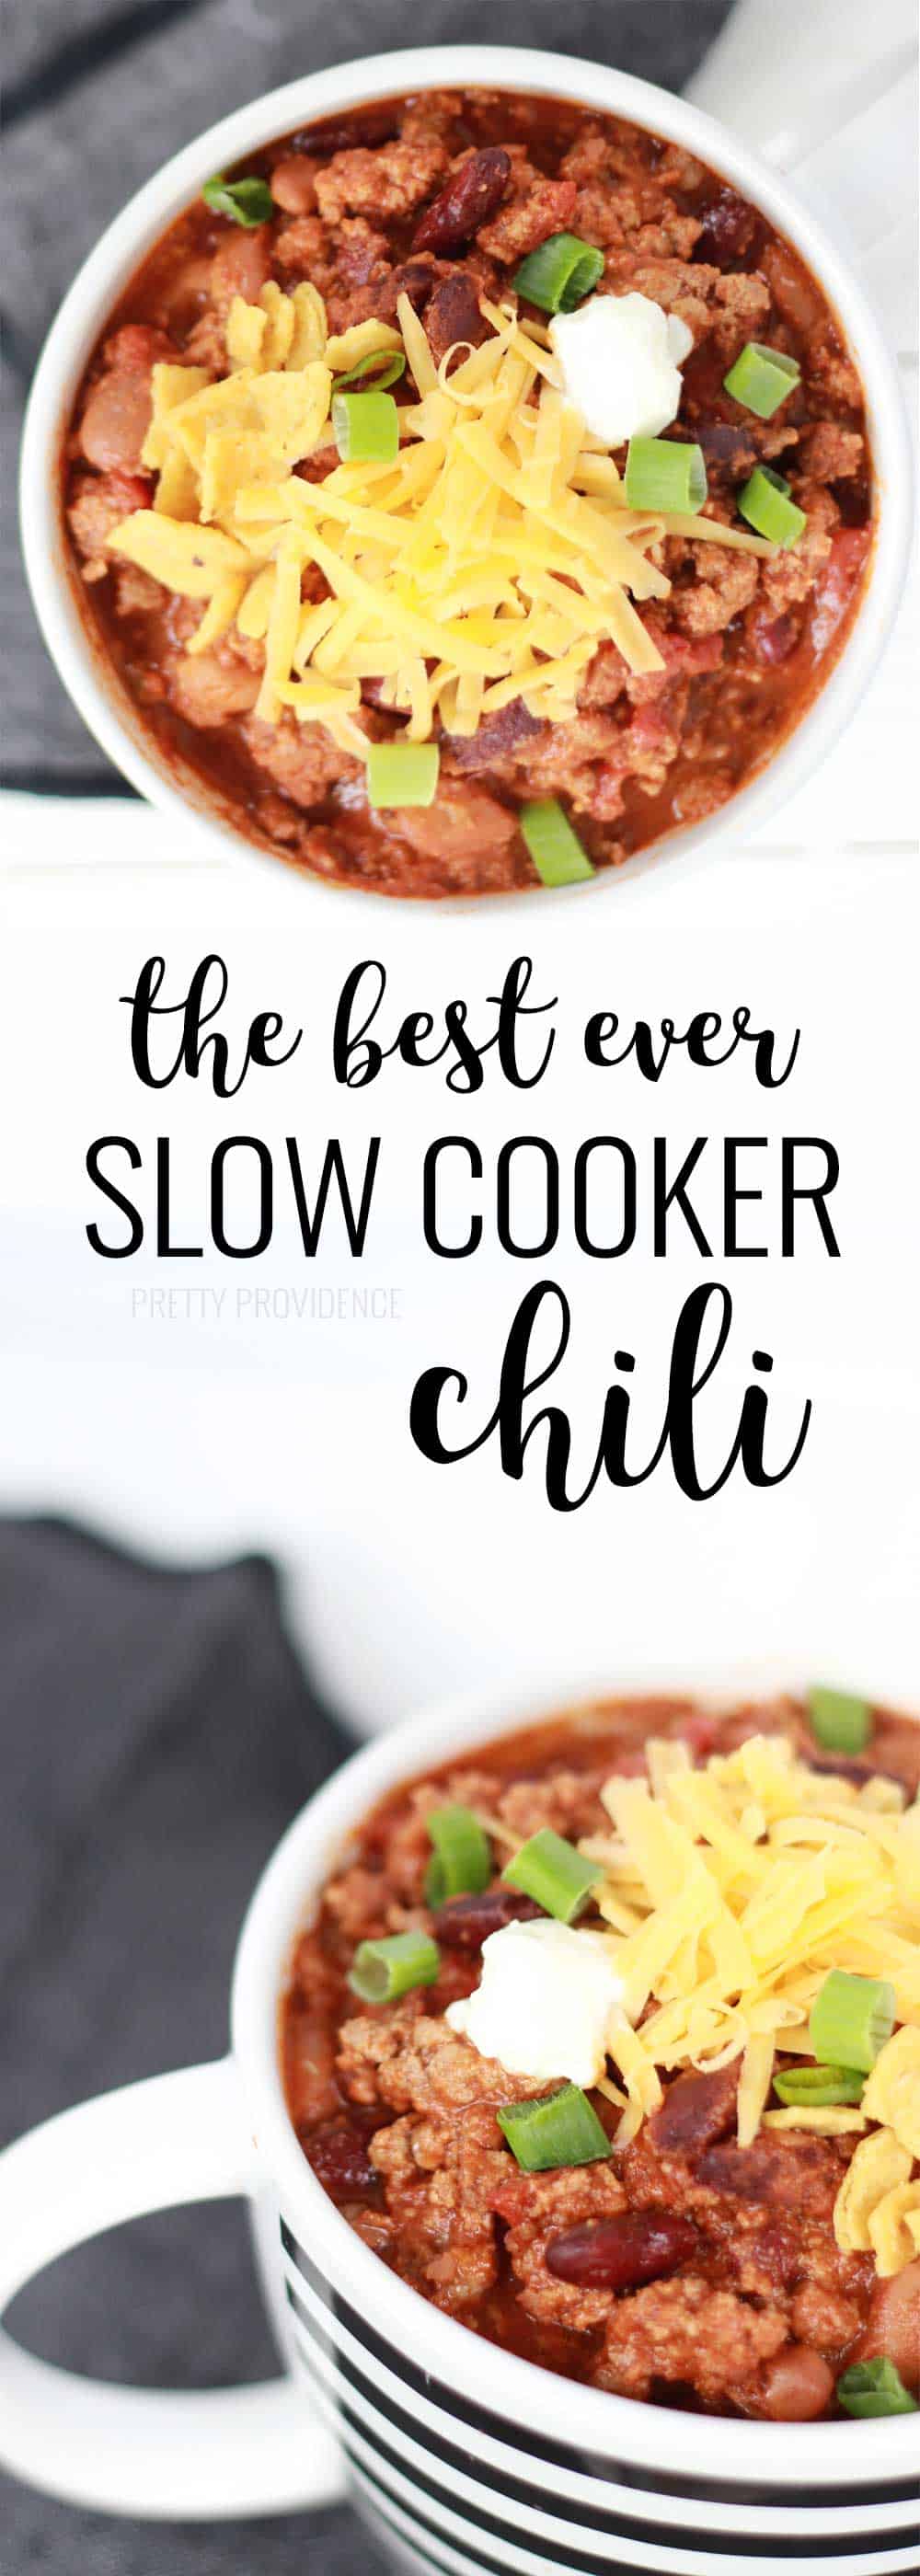 Best Slow Cooker Chili